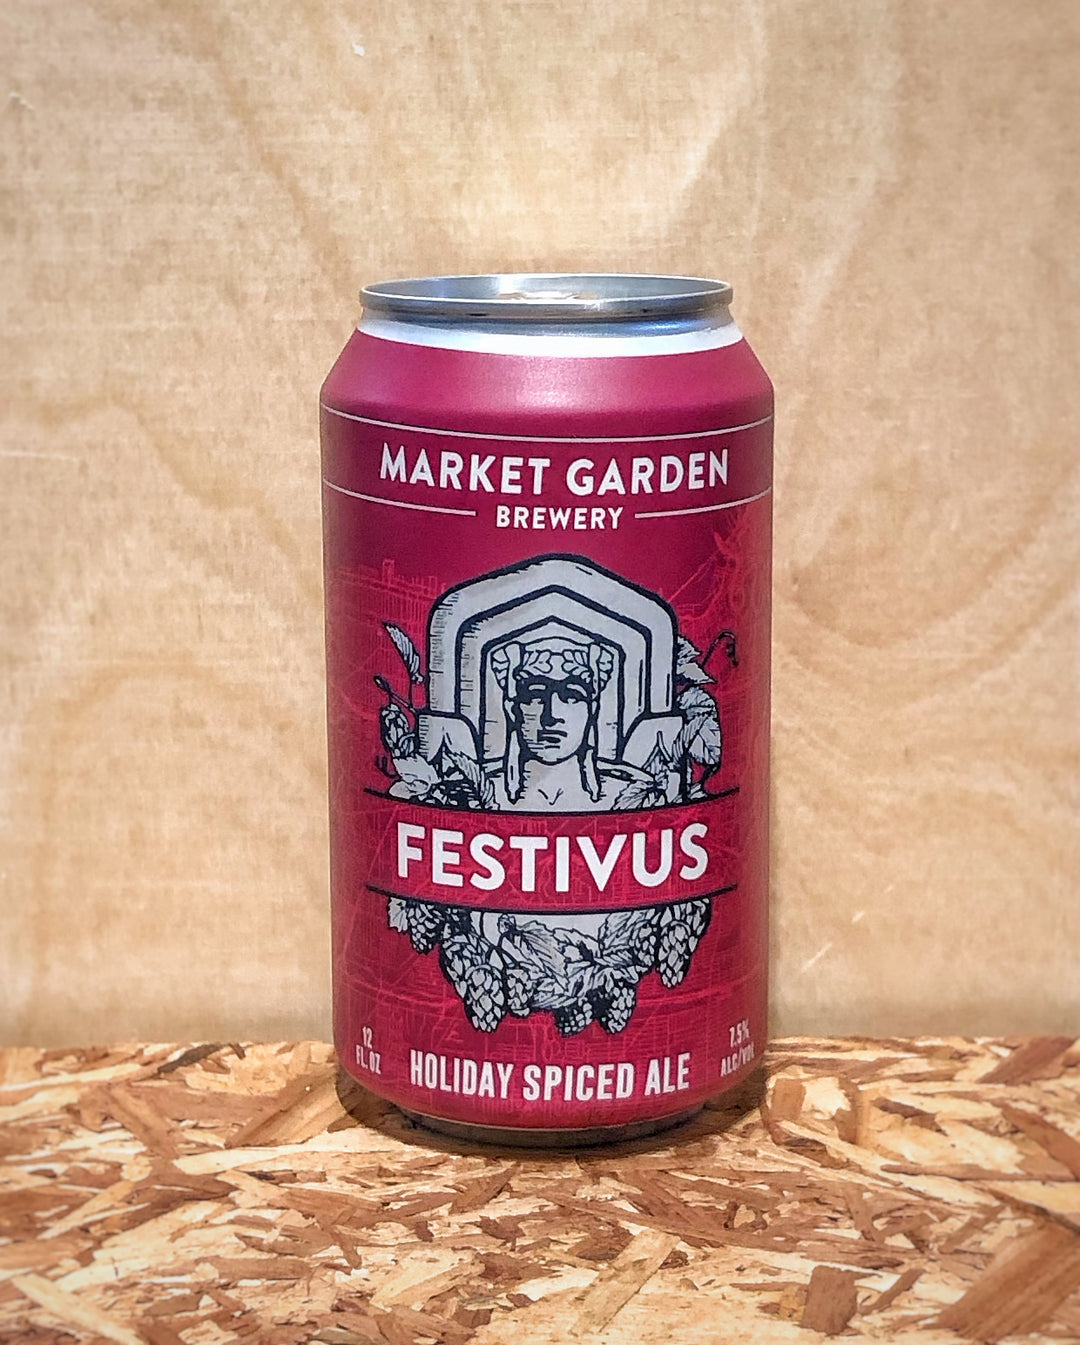 Market Garden Brewery 'Festivus' Holiday Spiced Ale (Cleveland, OH)